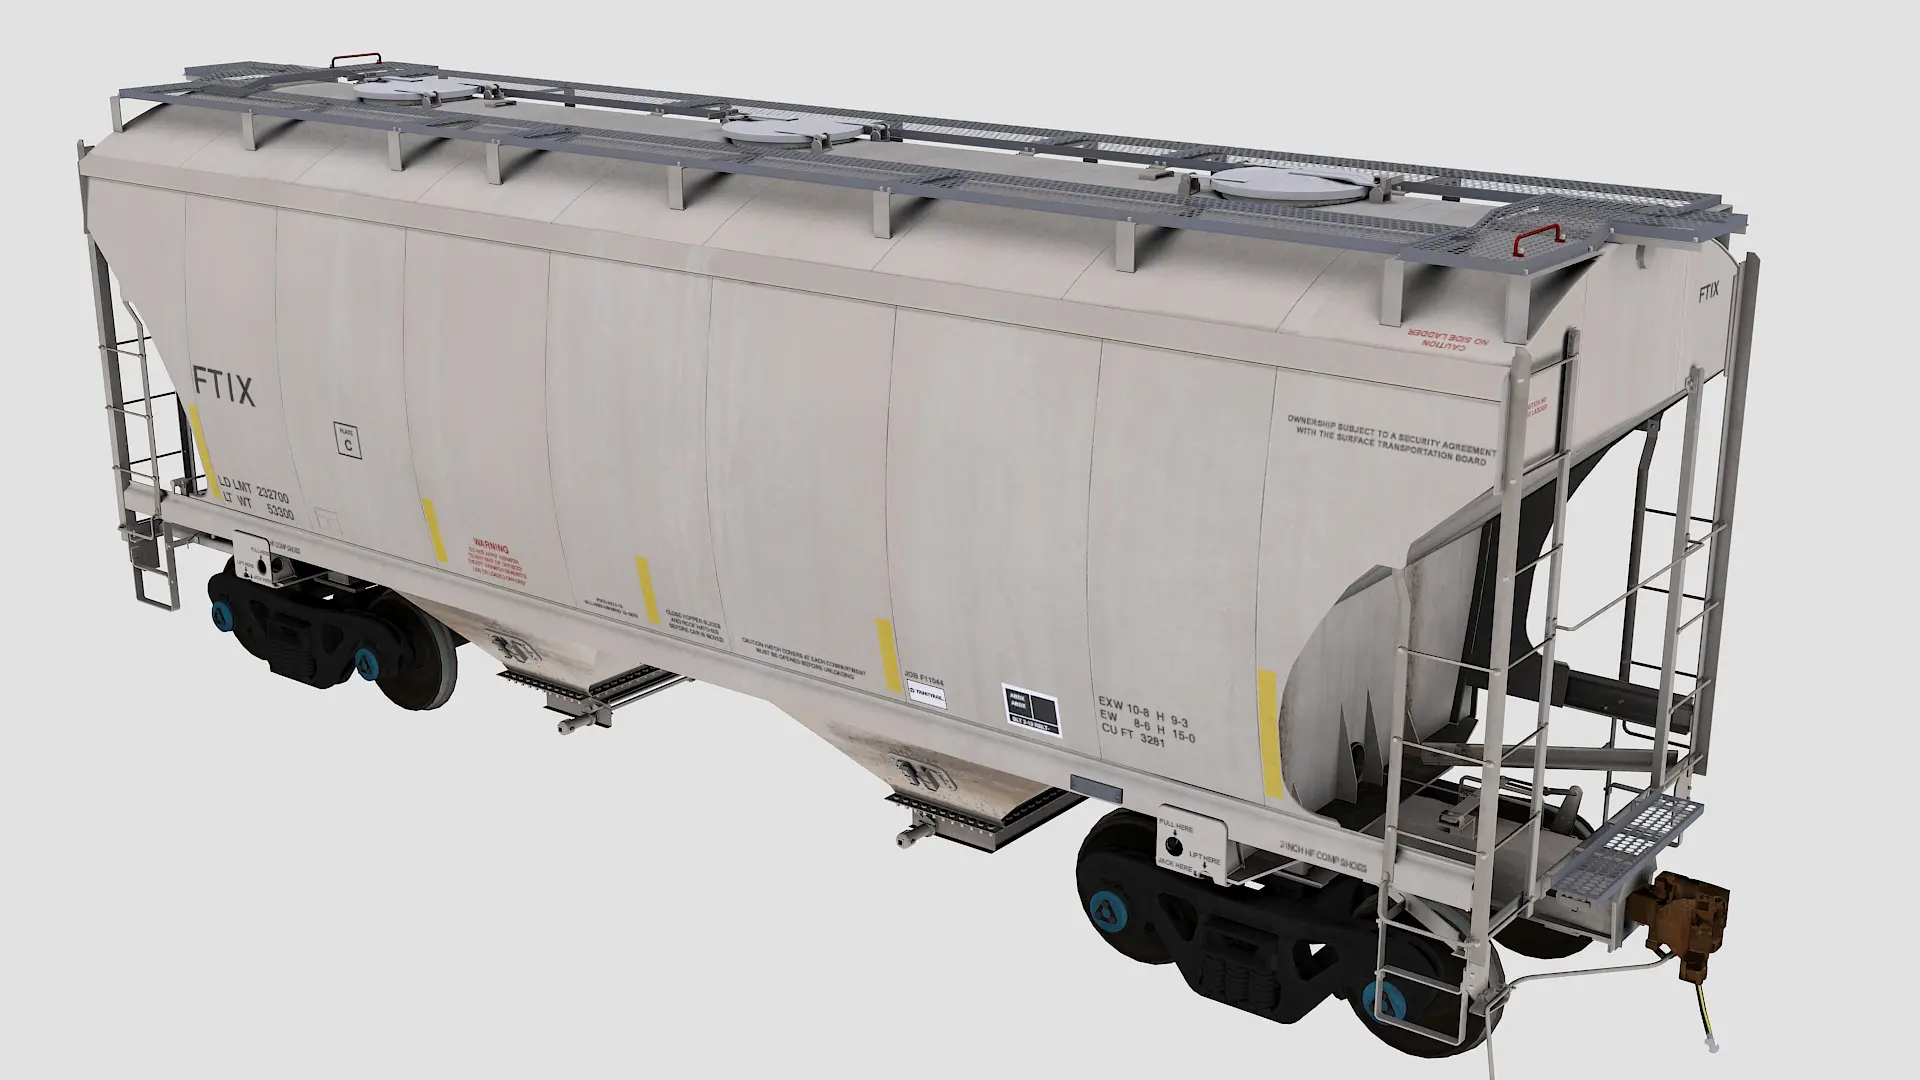 Ftix is two bay covered hopper